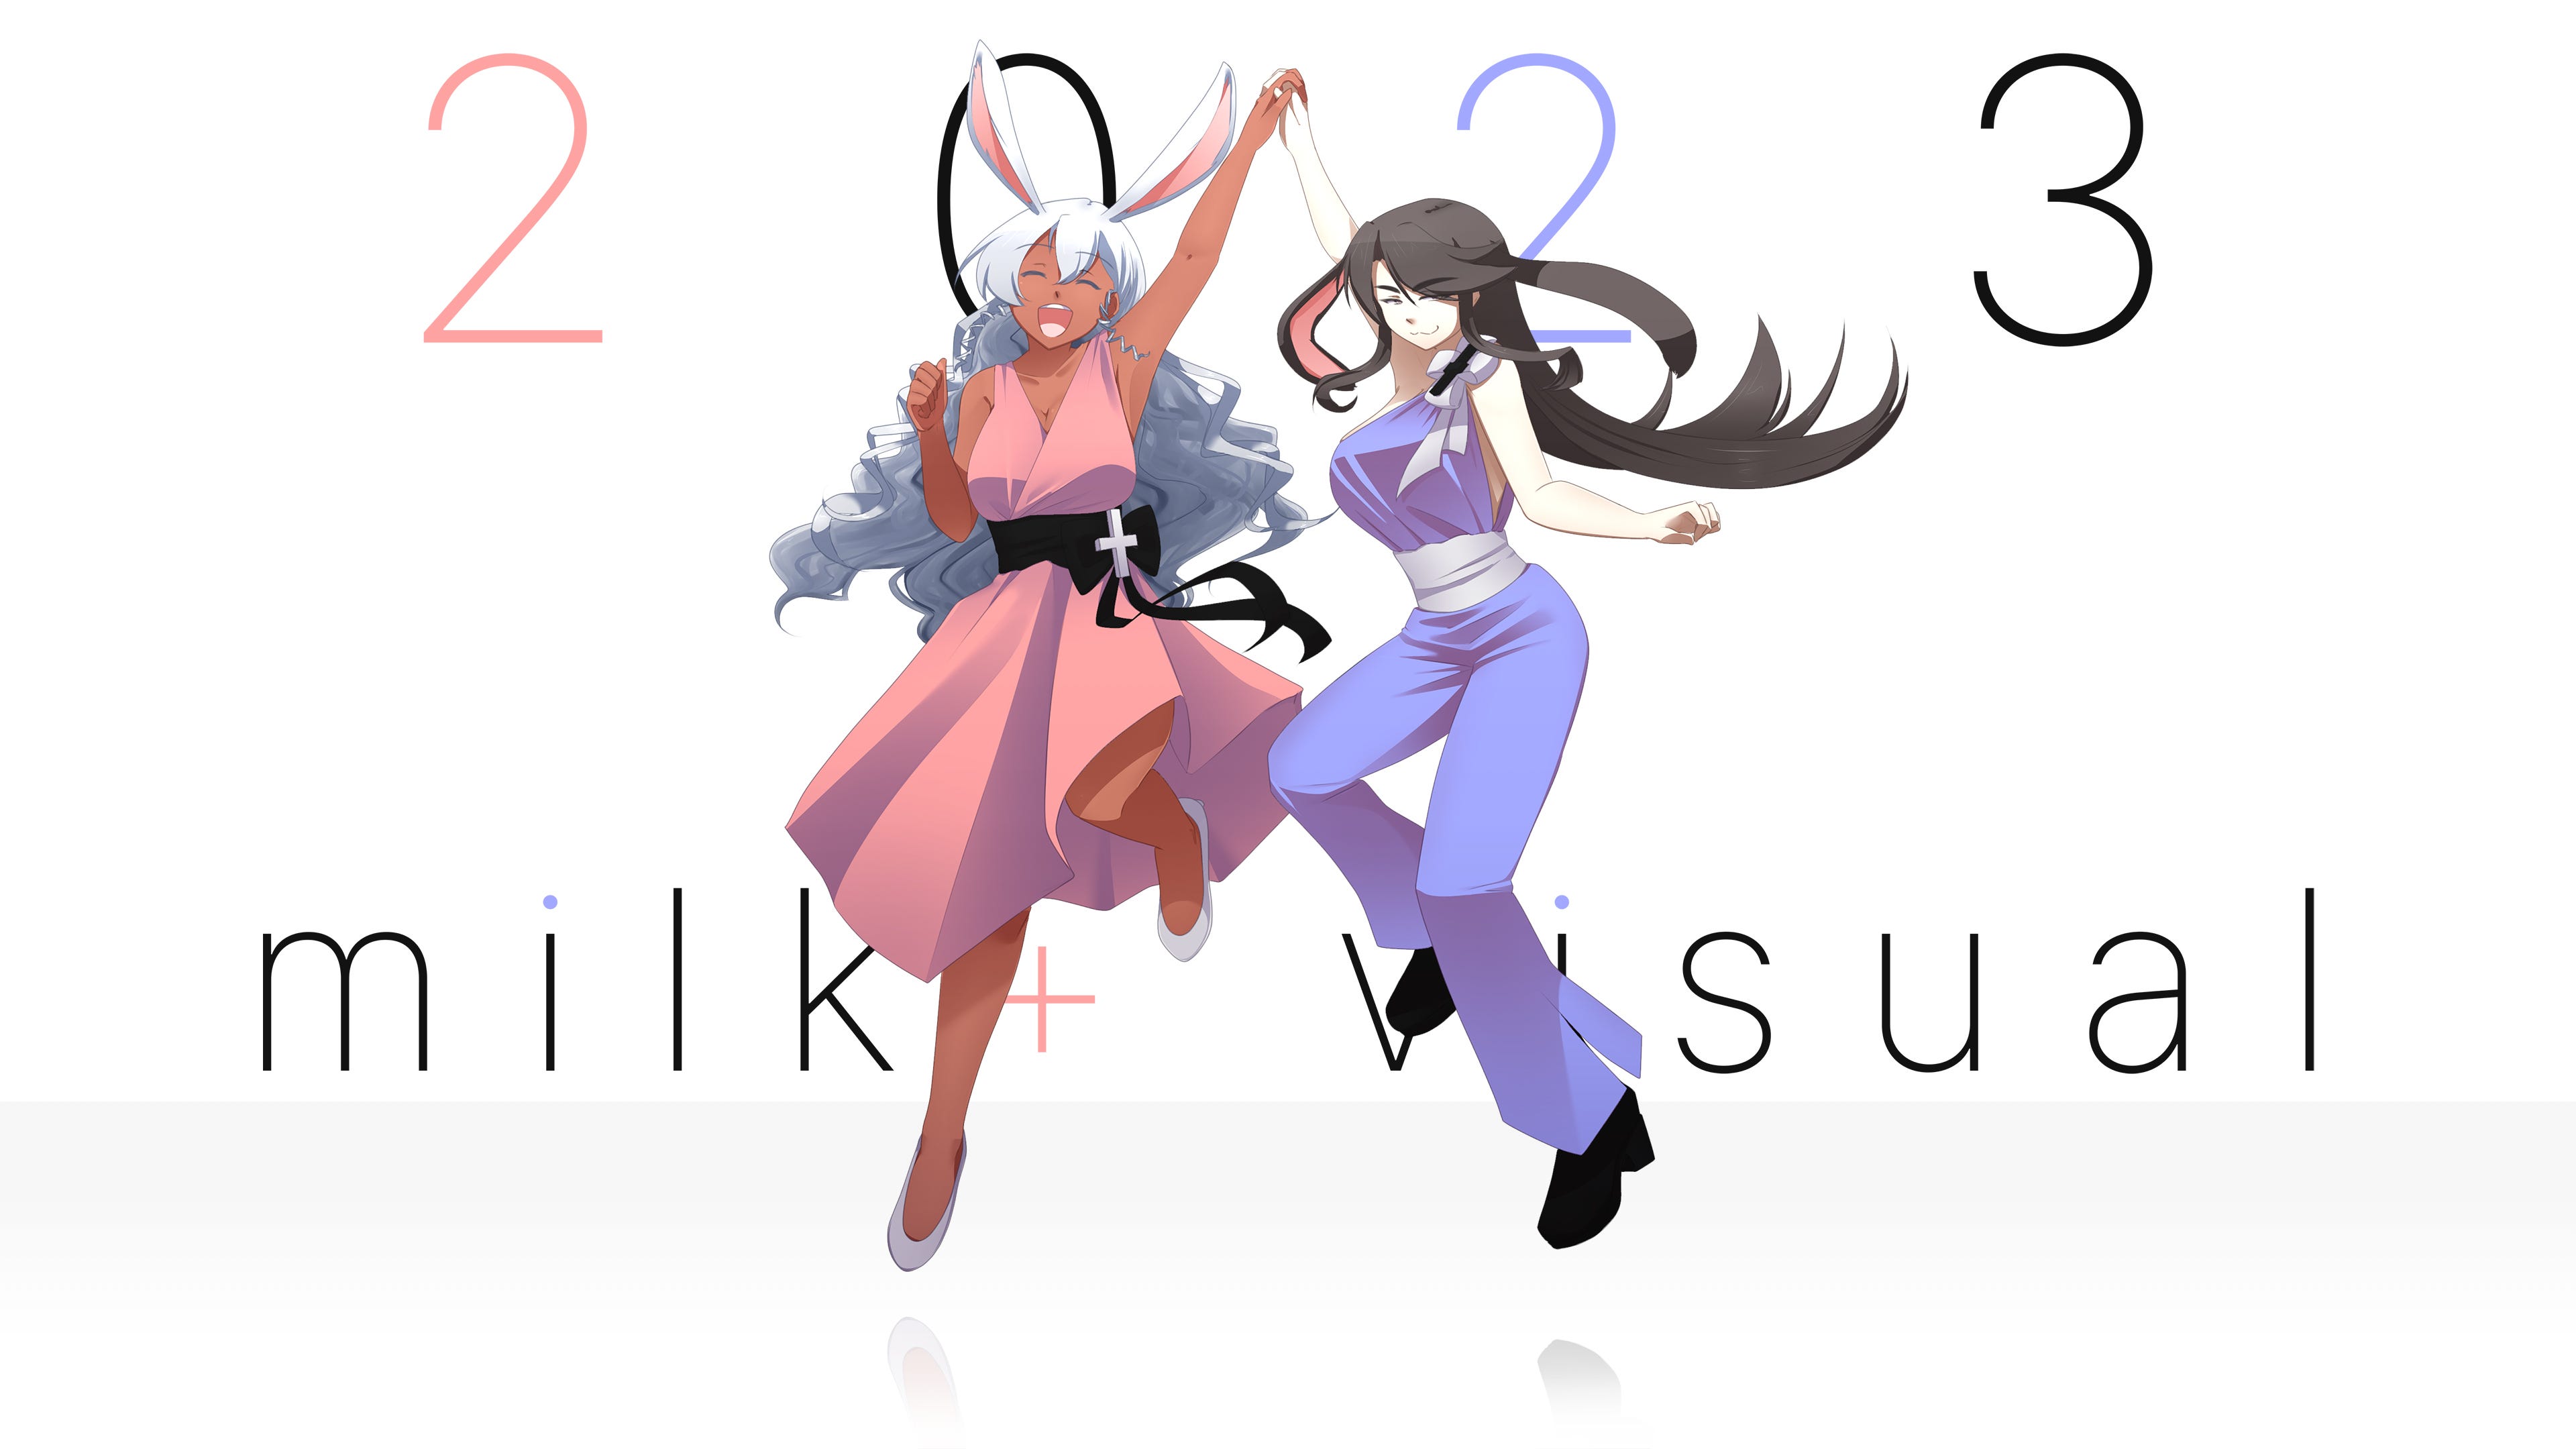 image of milk+ visual mascots magenta milk and monochrome matrimony in blue and pink new years outfits and bunny ears jumping in the air as they hold hands. behind them is the text 2023 and milk+ visual